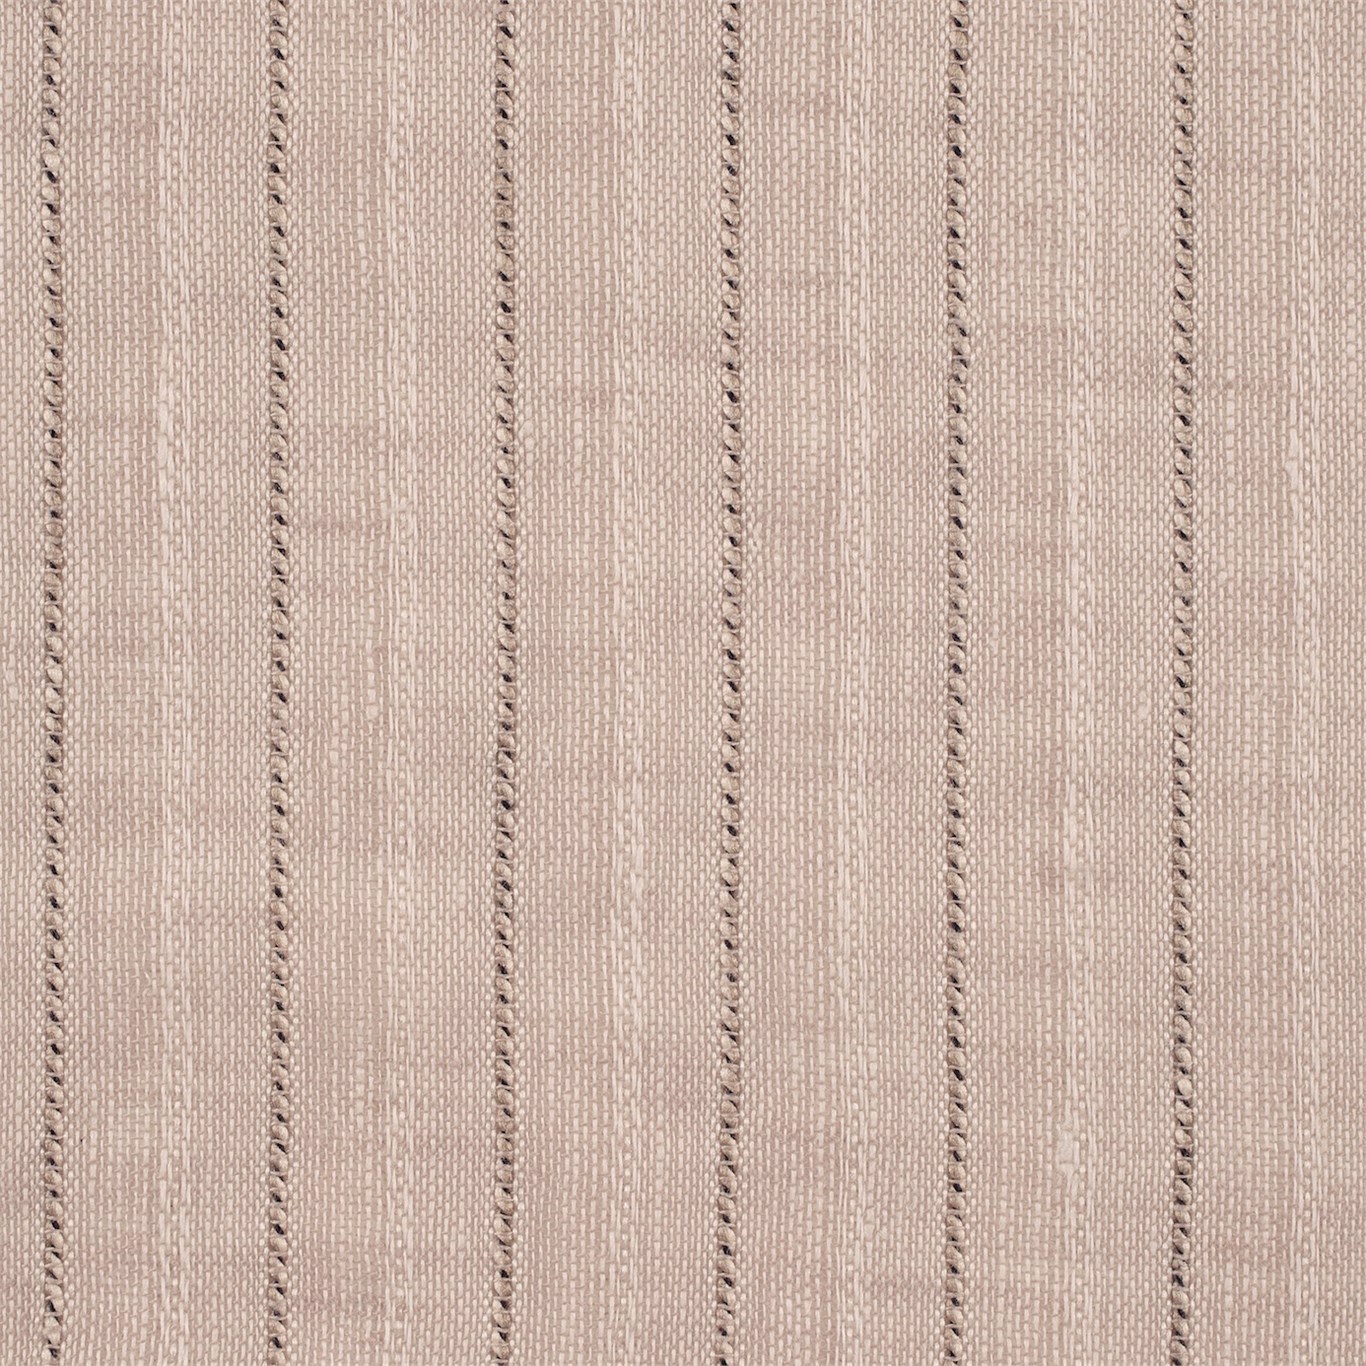 Purity Voiles Flax/Ivory Fabric by HAR